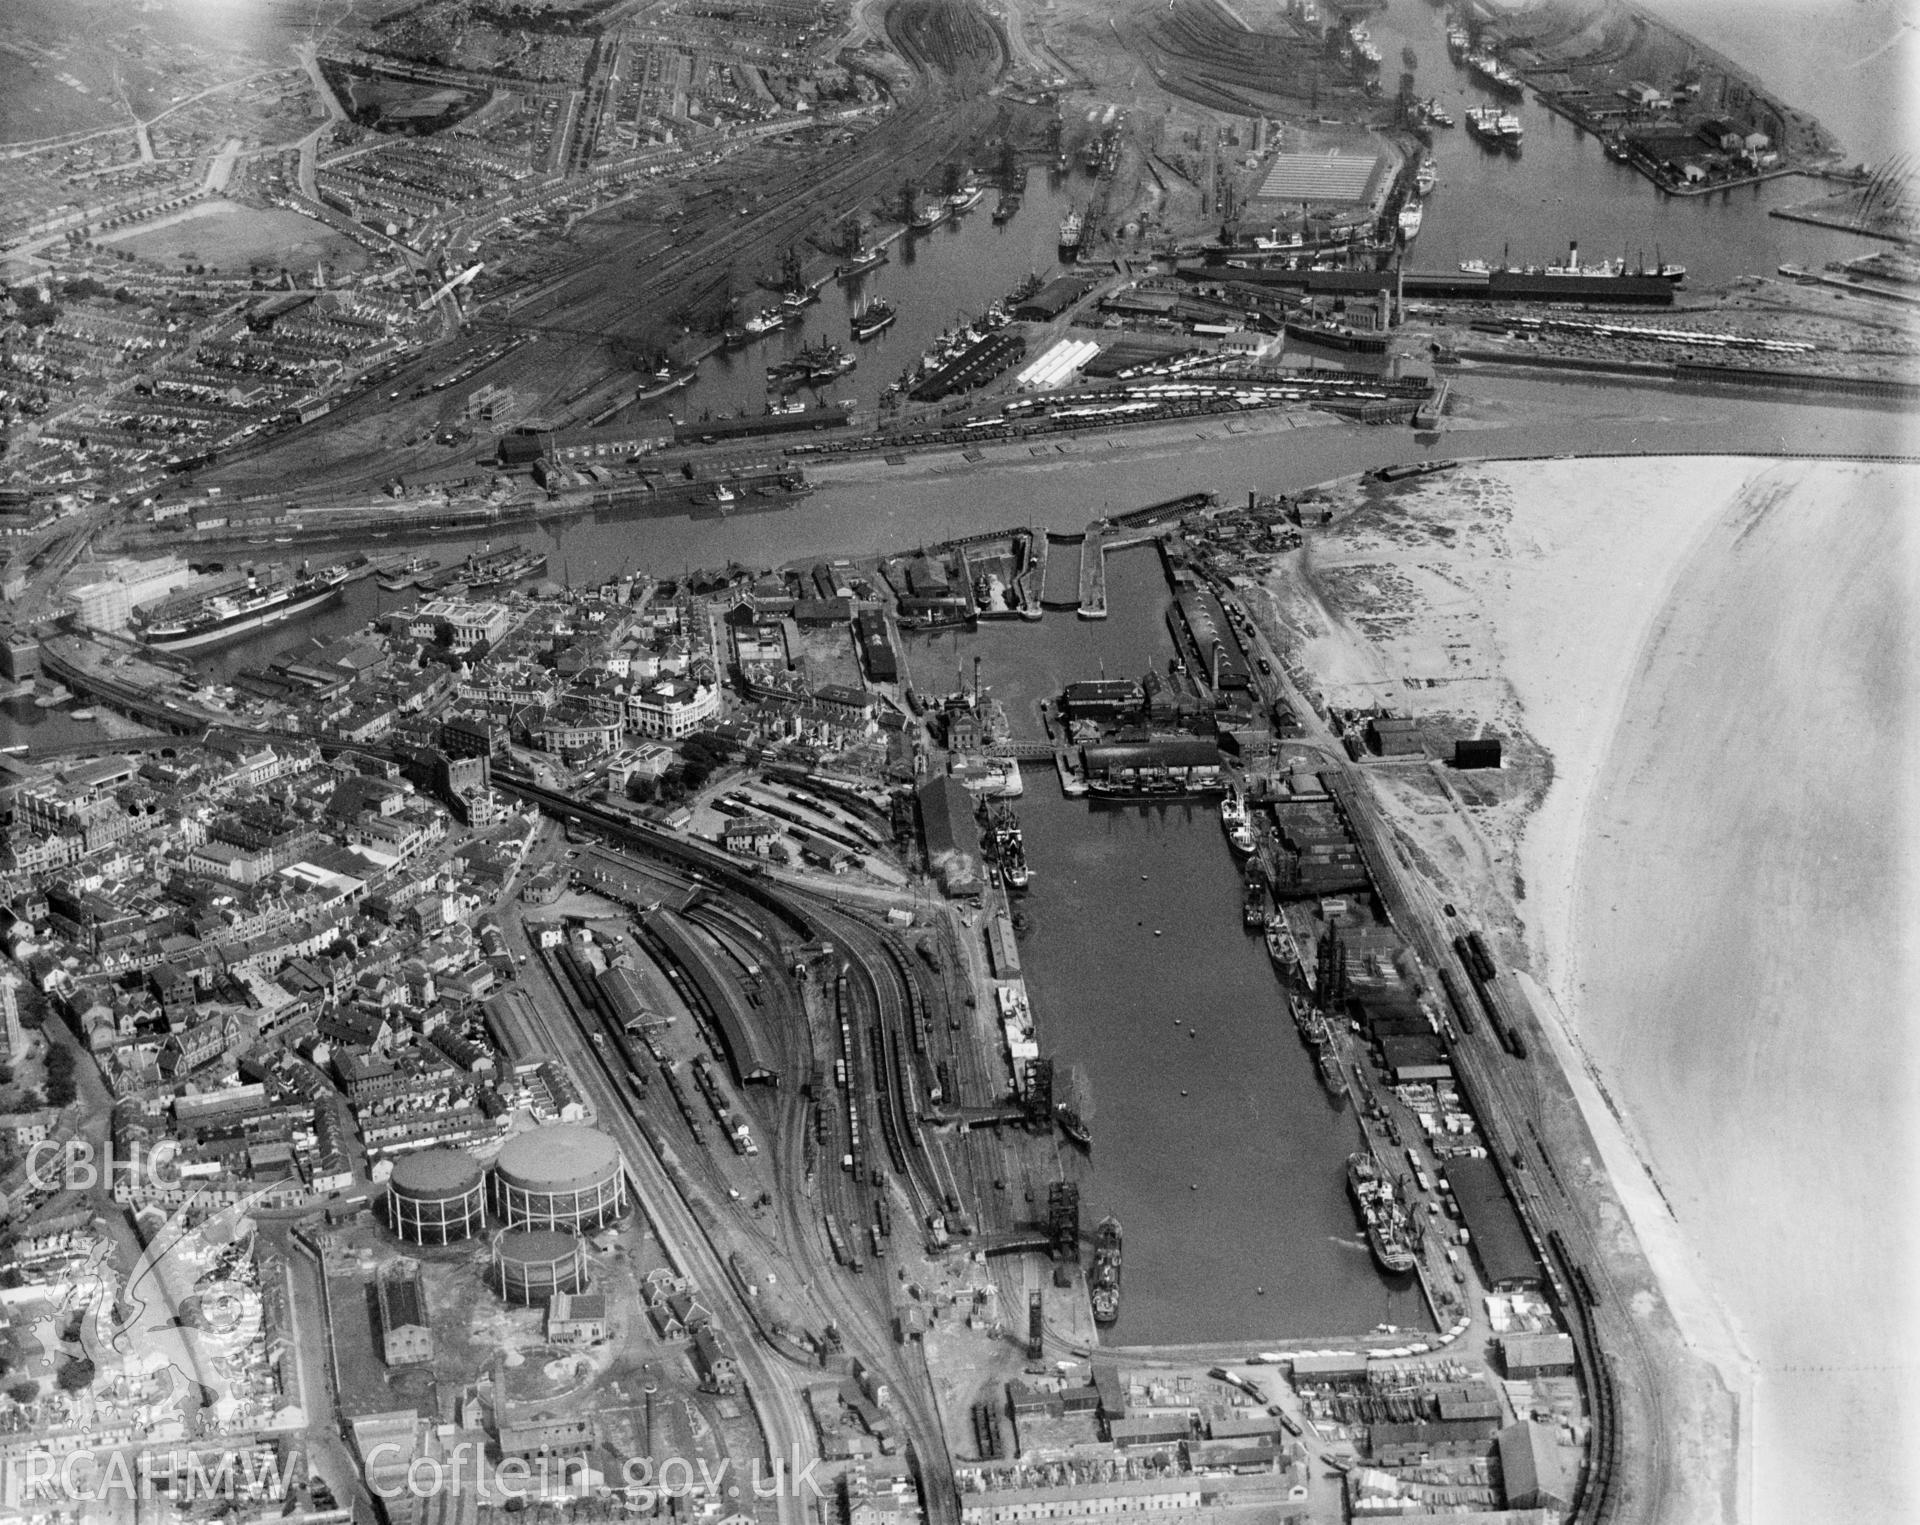 General view of Swansea showing docks, oblique aerial view. 5?x4? black and white glass plate negative.